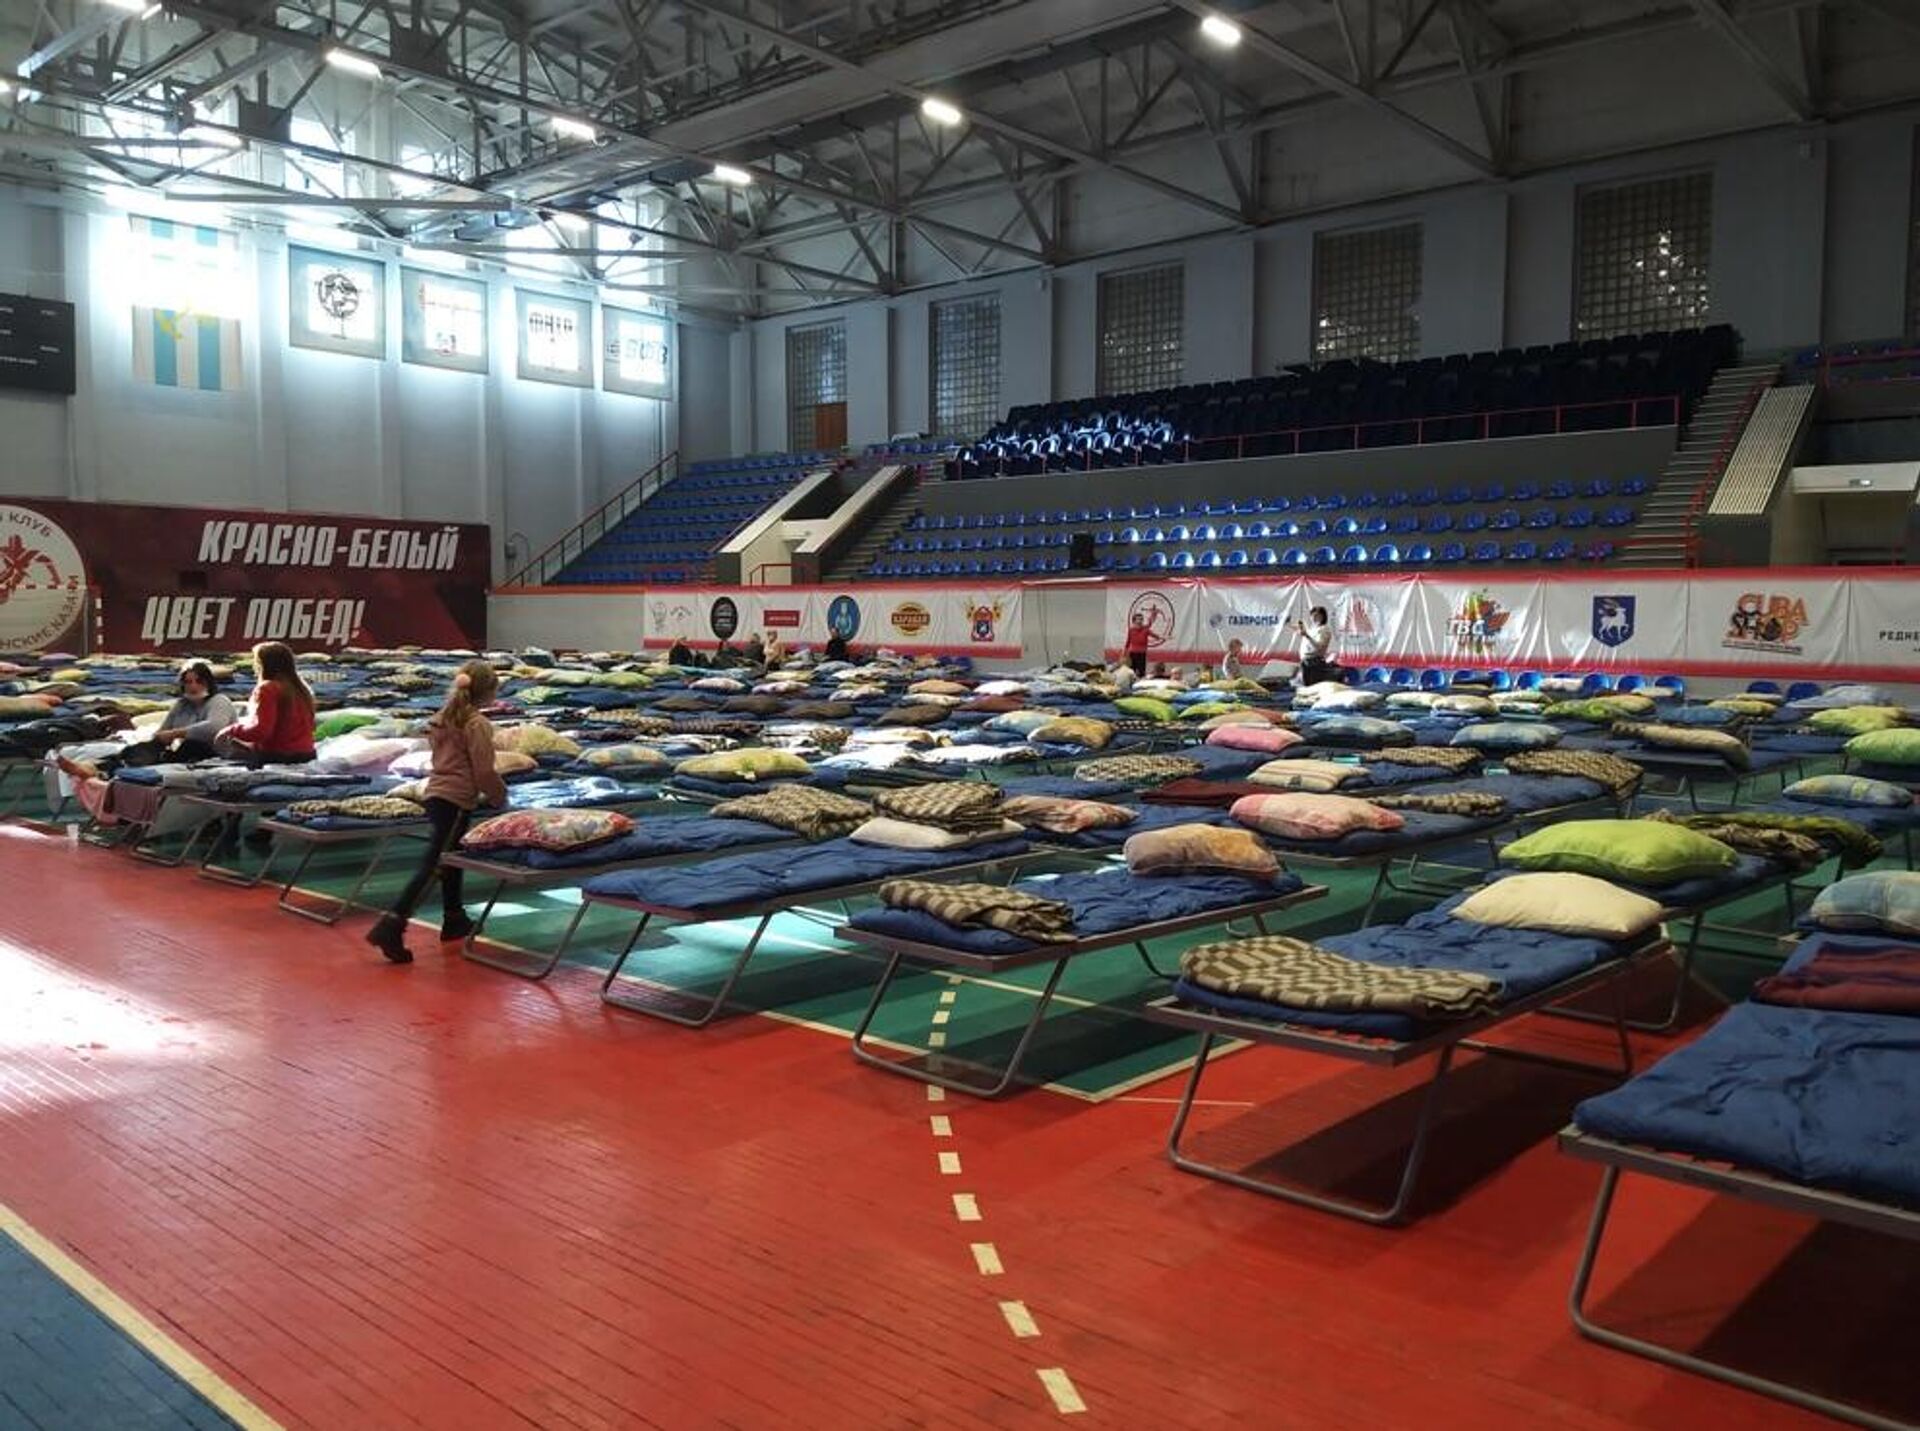  DPR - refugees are placed in a point located in the sports palace - Sputnik International, 1920, 22.02.2022